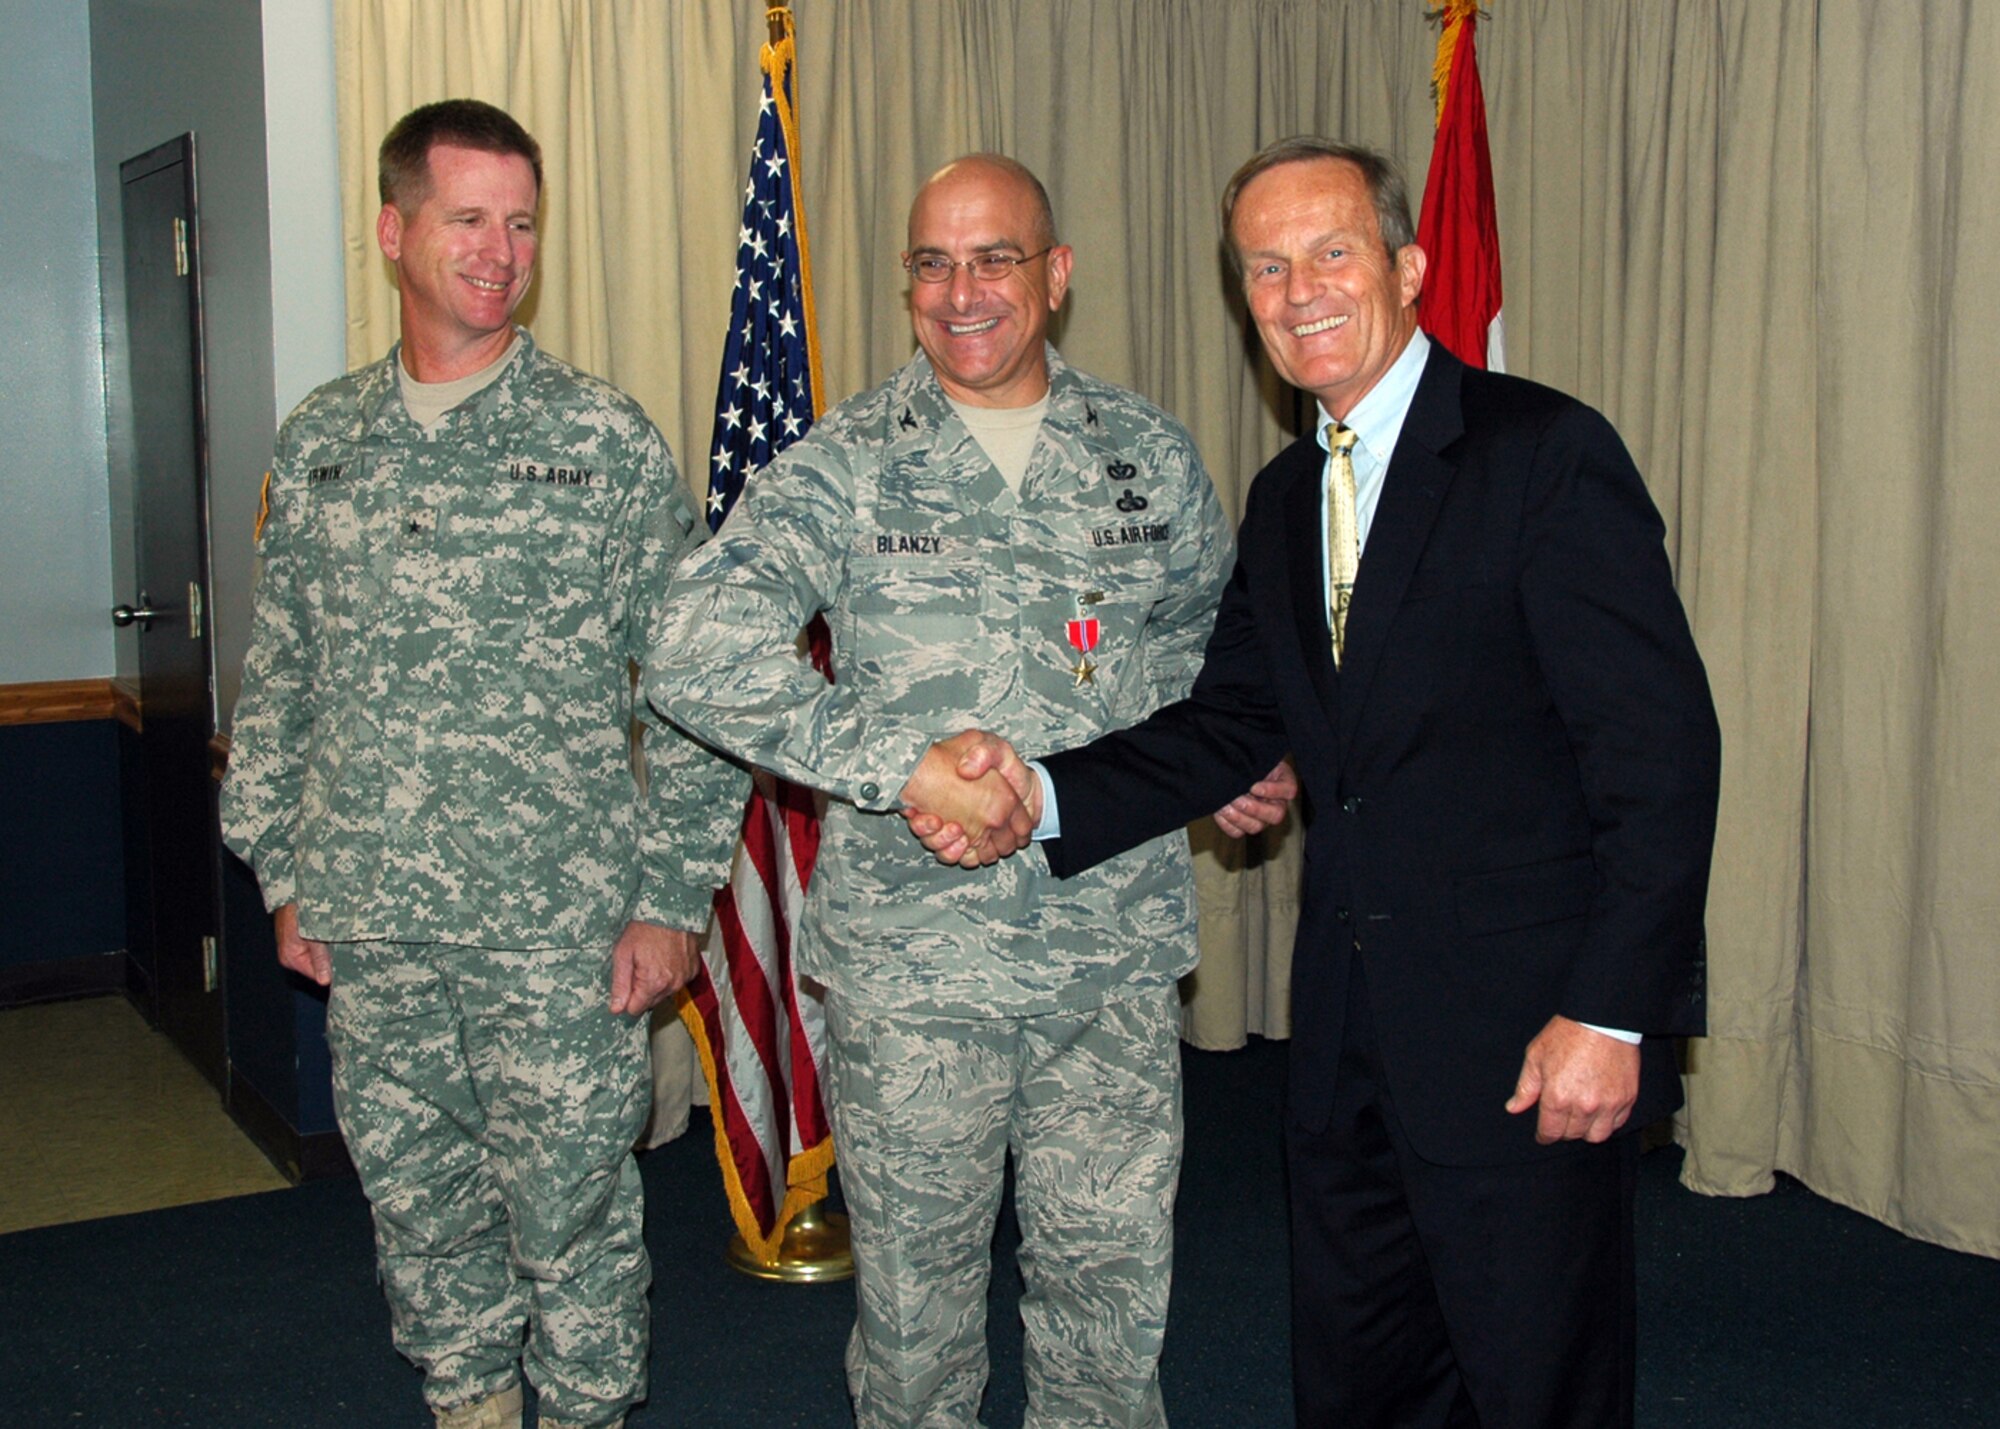 Congressman Todd Akin (R-MO) congratulates Colonel Paul Blanzy of the 231 Civil Engineering Flight-Missouri Air National Guard, on his award of the Bronze Star Service Medal on July 18, while Brigadier General David Irwin, Commander 35th Engineer Brigade-Missouri Army National Guard, looks on.  Colonel Blanzy received the Bronze Star for meritorious service with the U.S. Army at Forward Operating Base Salerno, Khost, Afghanistan from July 2008 - January 2009.  (Photo by Master Sgt. Mary-Dale Amison)